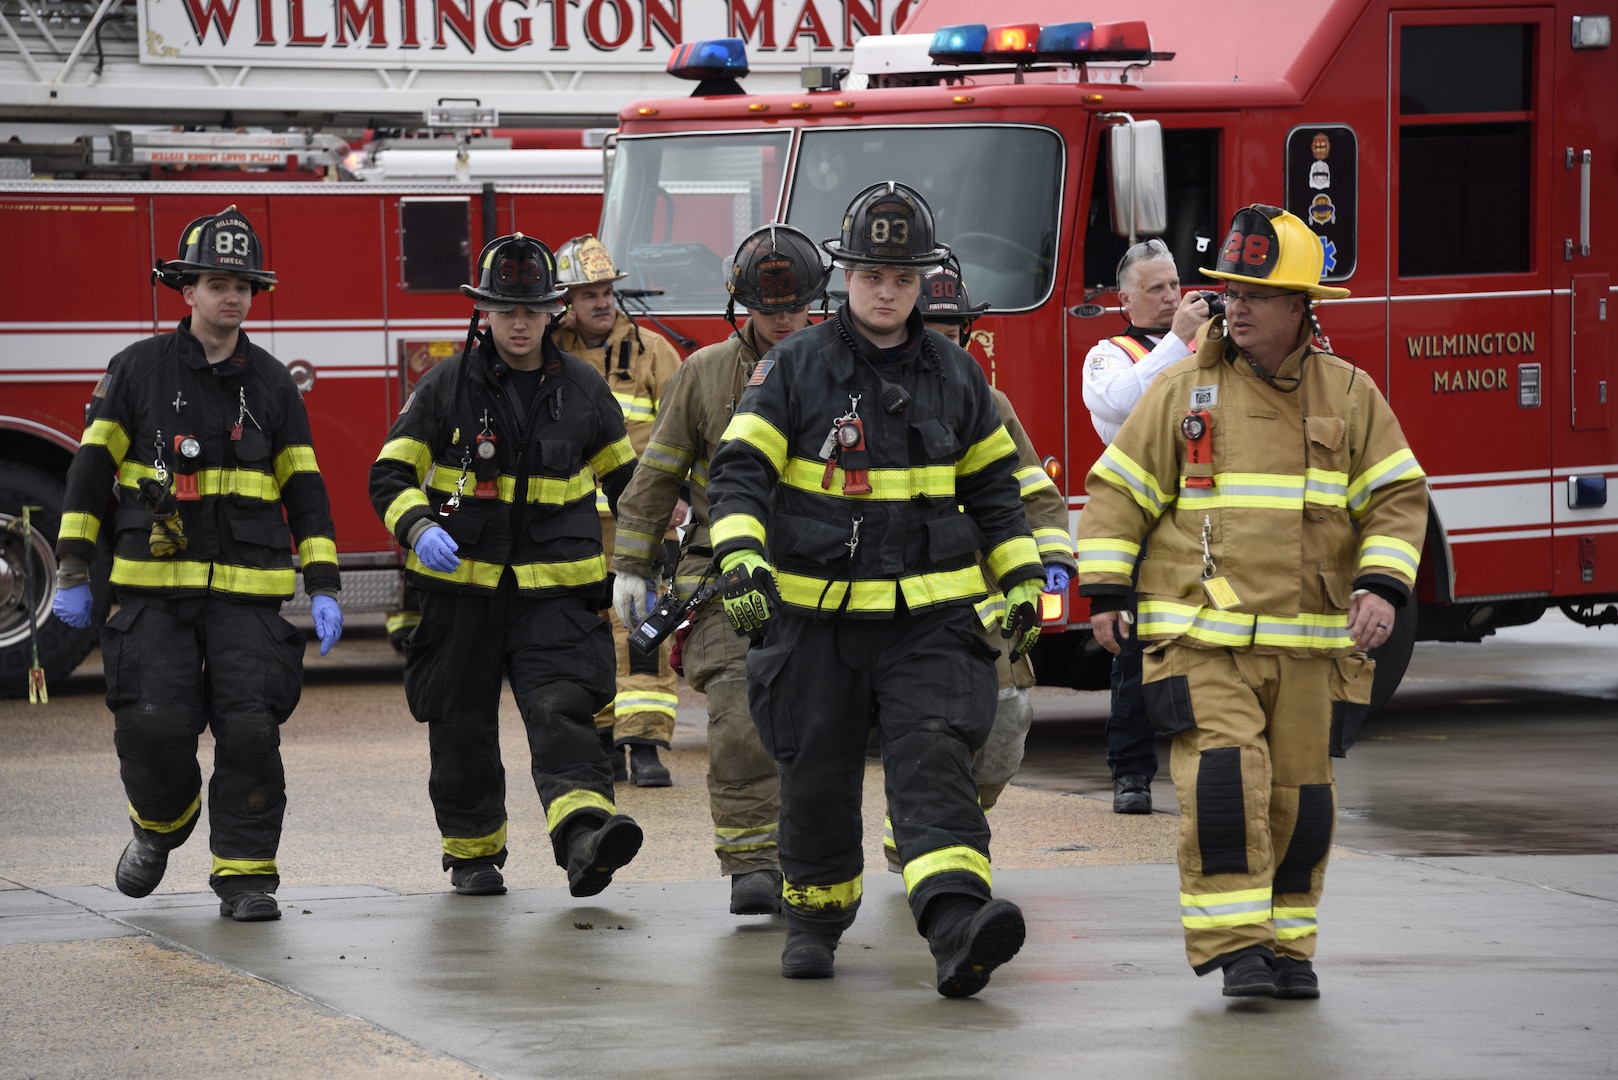 Wilmington manor Firefighters arrive on scene to assist the 166th Civil Engineer Squadron Firefighters during Operation Blue Skywalker, April 10, 2019 at Delaware National Guard Base, Del. Wilmington Manor is one of the local authorities holding a coordinated response agreement with the 166th Airlift Wing. (U.S. Air Force photo by Mr. Mitch Topal)